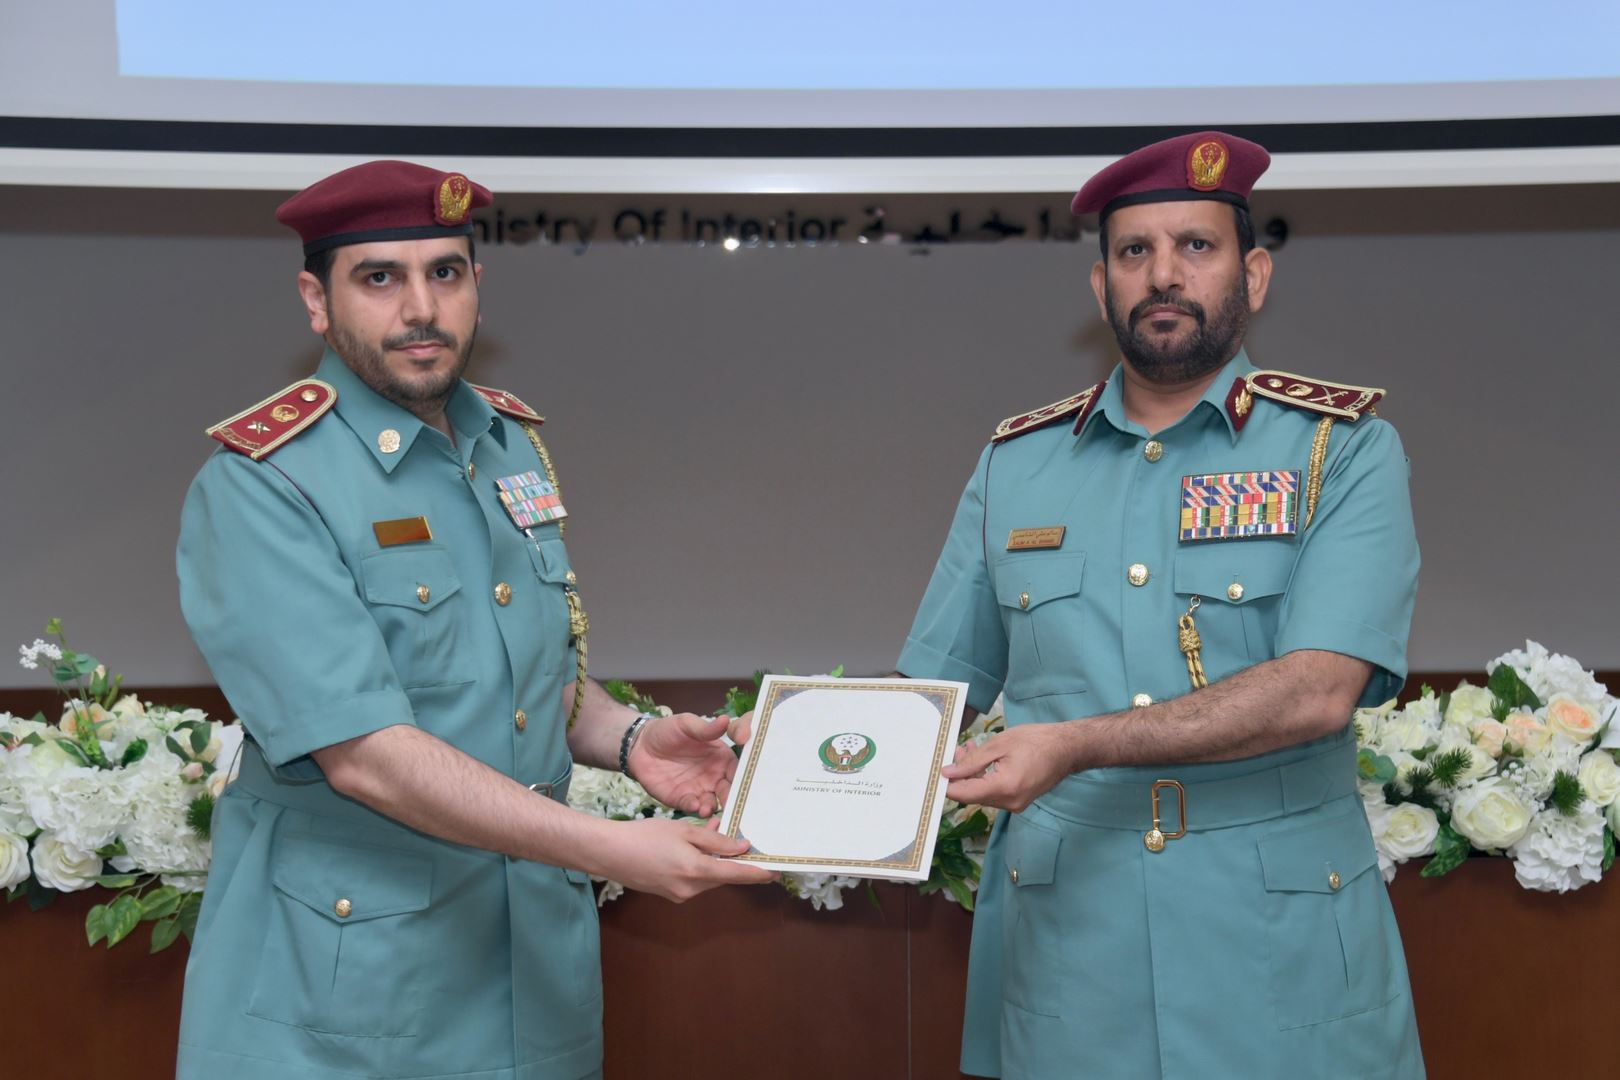 BEST POLICE PRACTICES FORUM AT THE MINISTRY OF INTERIOR